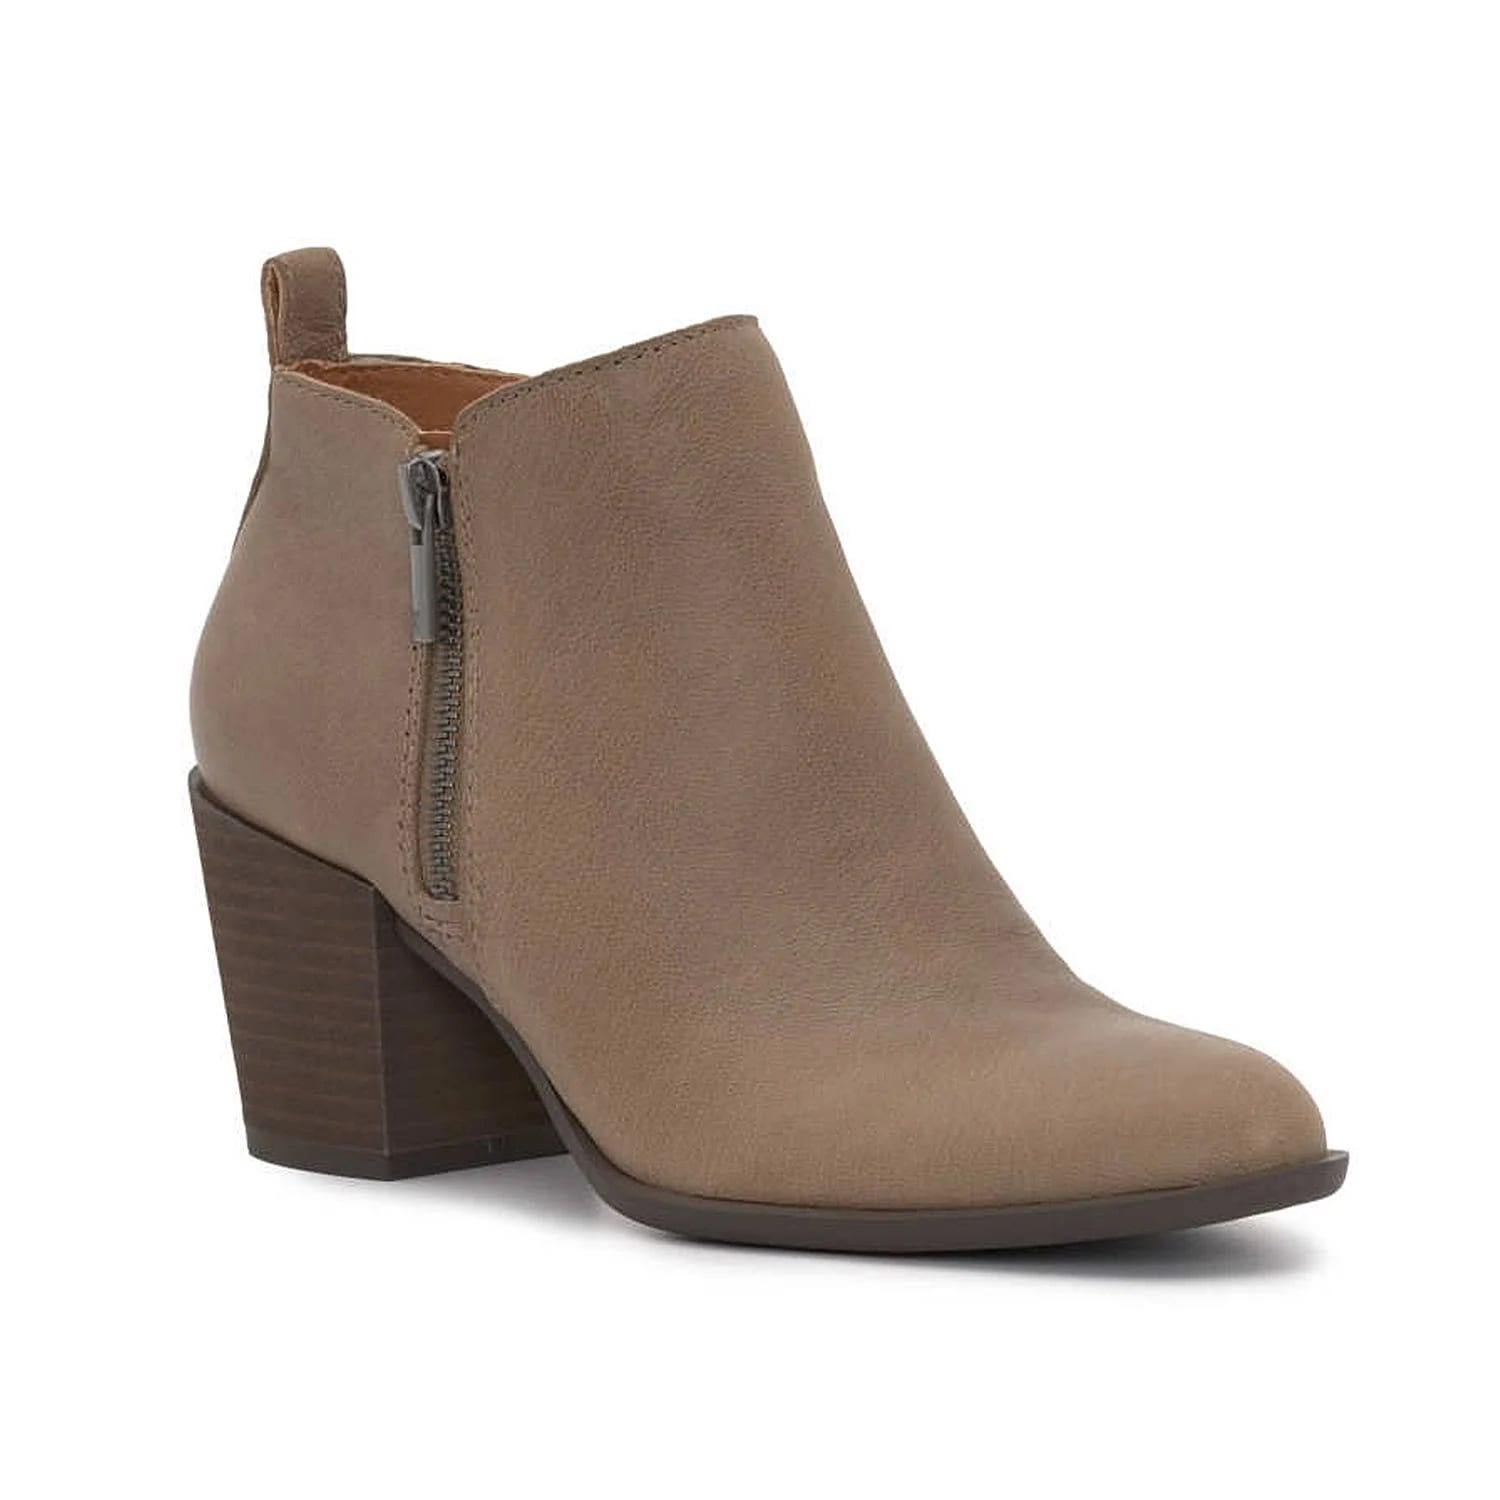 Lucky Brand Basel Mid Heel Bootie - Taupe Leather - Size 8.5 | Image